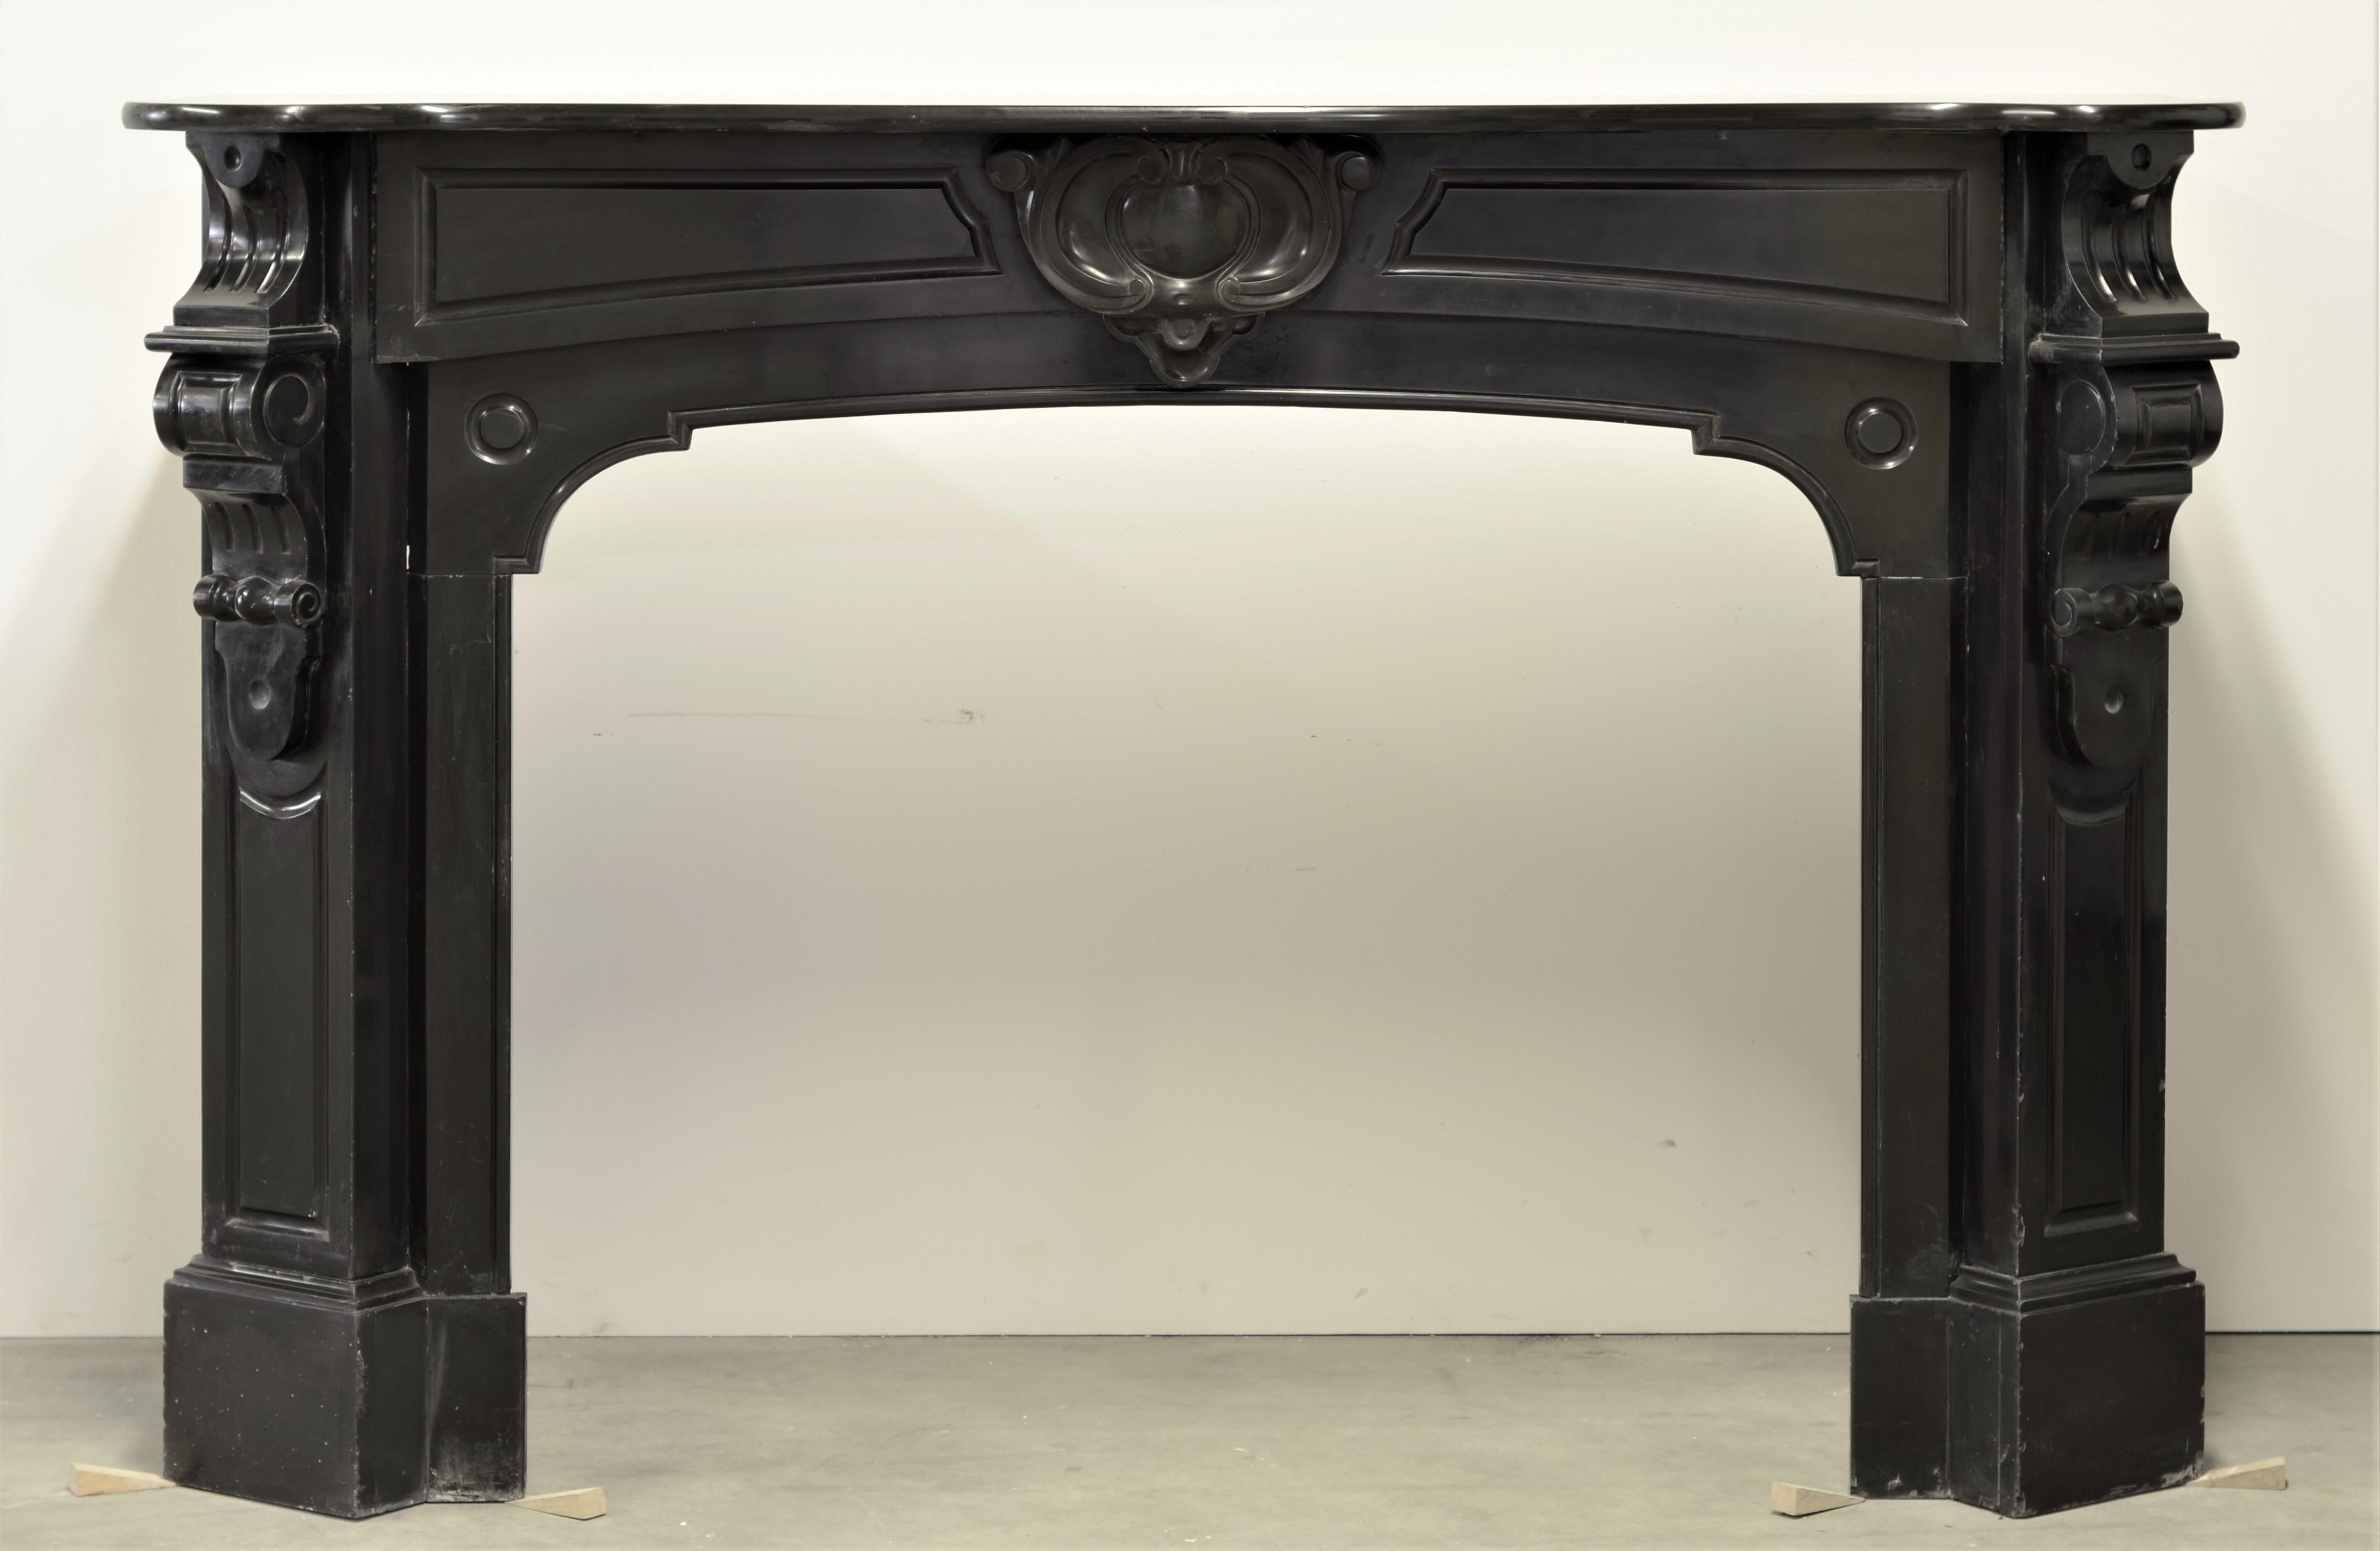 Nice antique Louis XV style marble fireplace in Noir de Mazy marble from Belgium, the beautiful deep black marble give it the perfect soft shine. 

Great original condition, ready to be crated, shipped and installed!

Sold by Schermerhorn